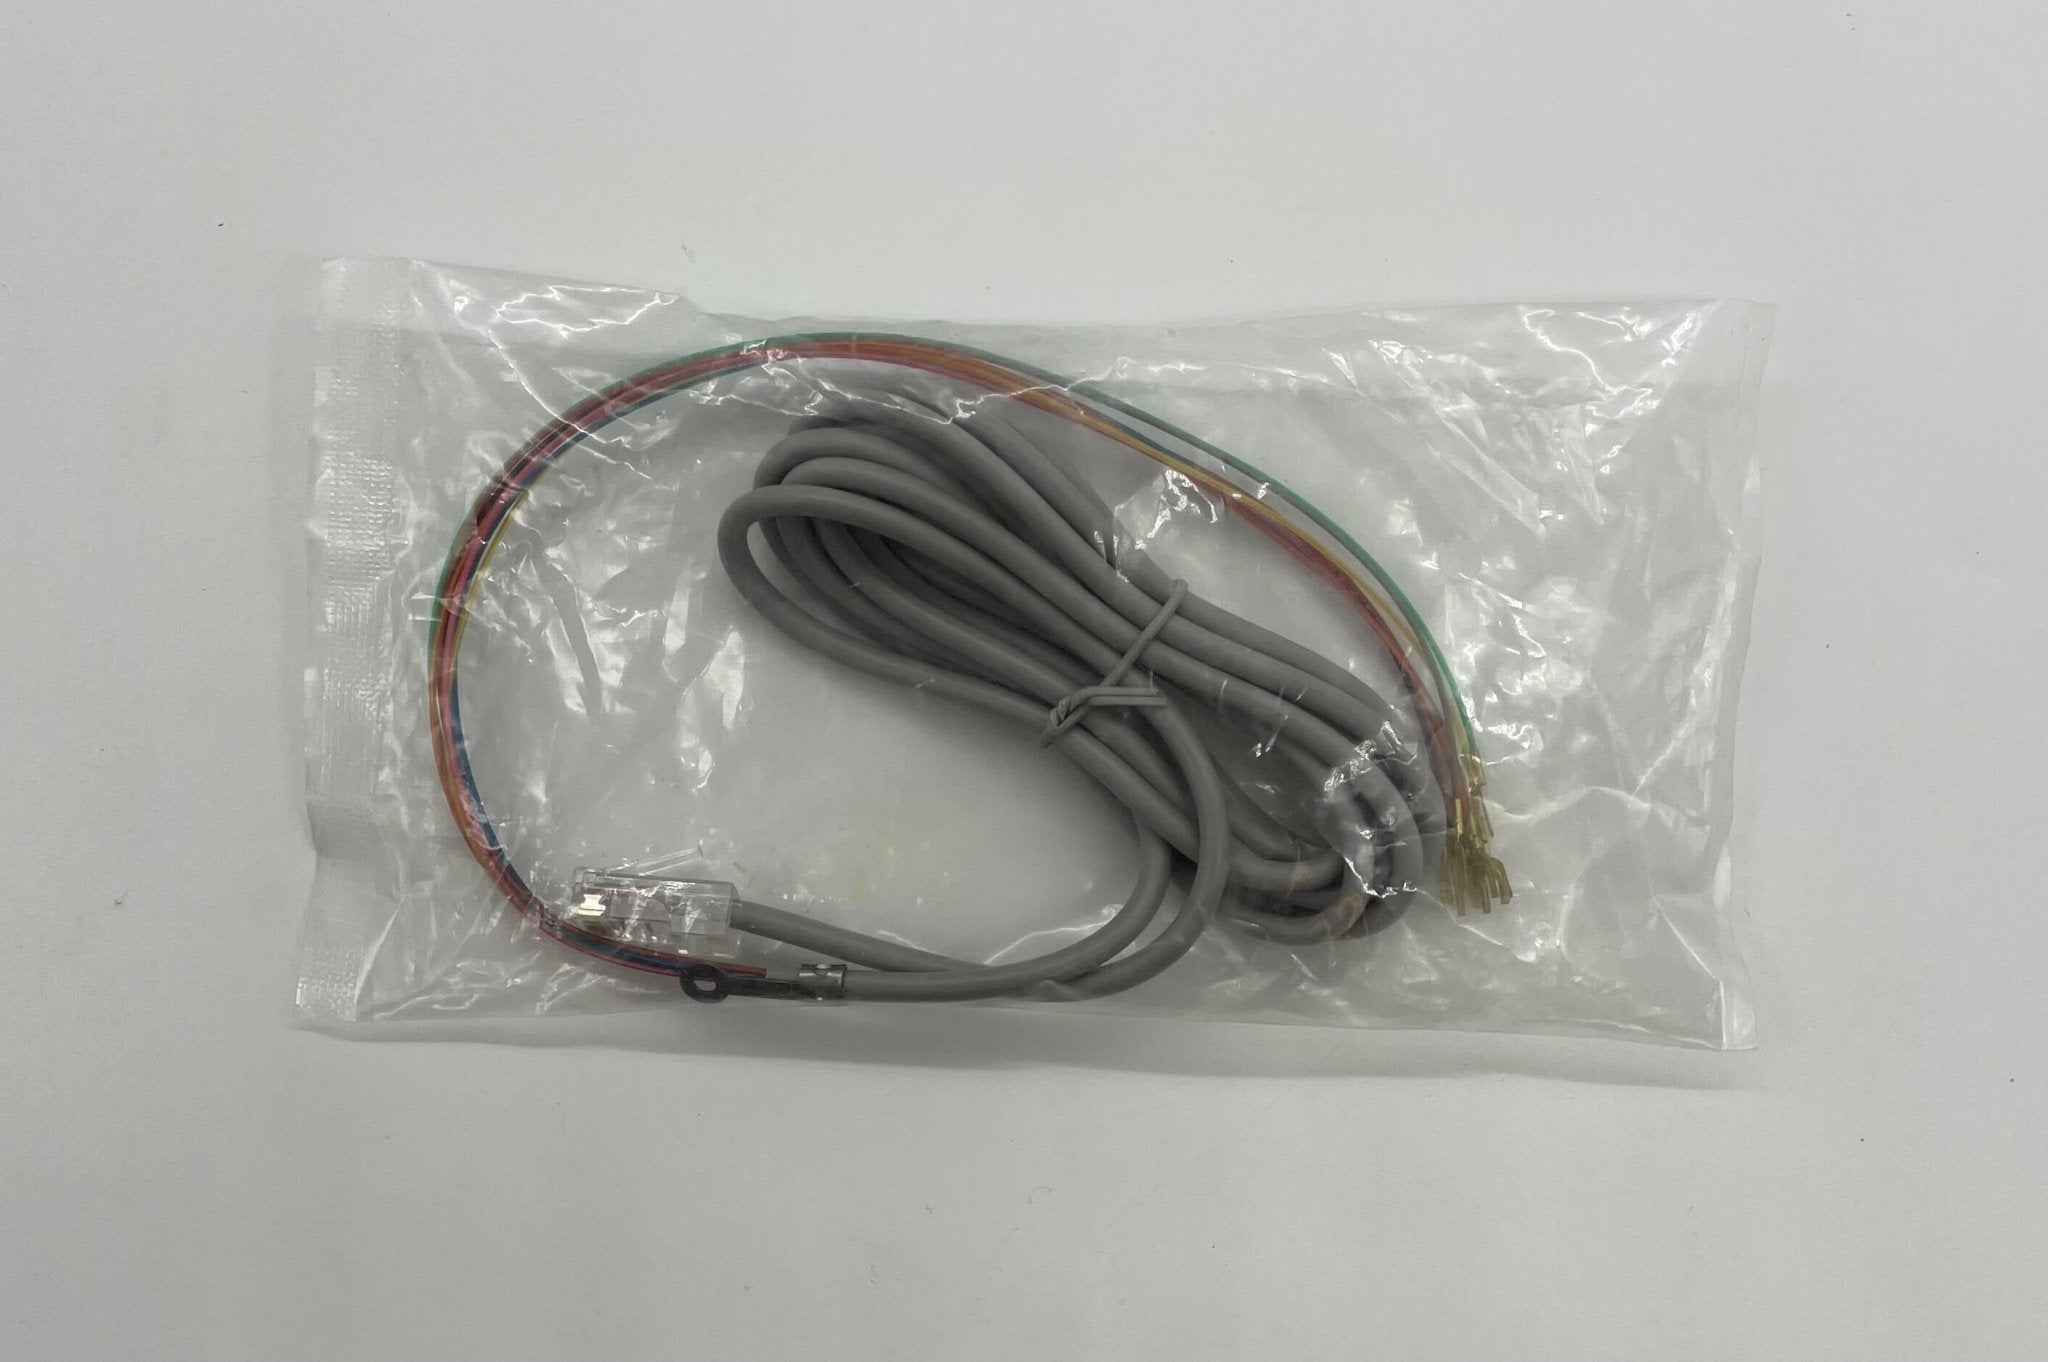 Firelite 7860 Telephone Connecting Cord for RJ31X Jack - The Fire Alarm Supplier